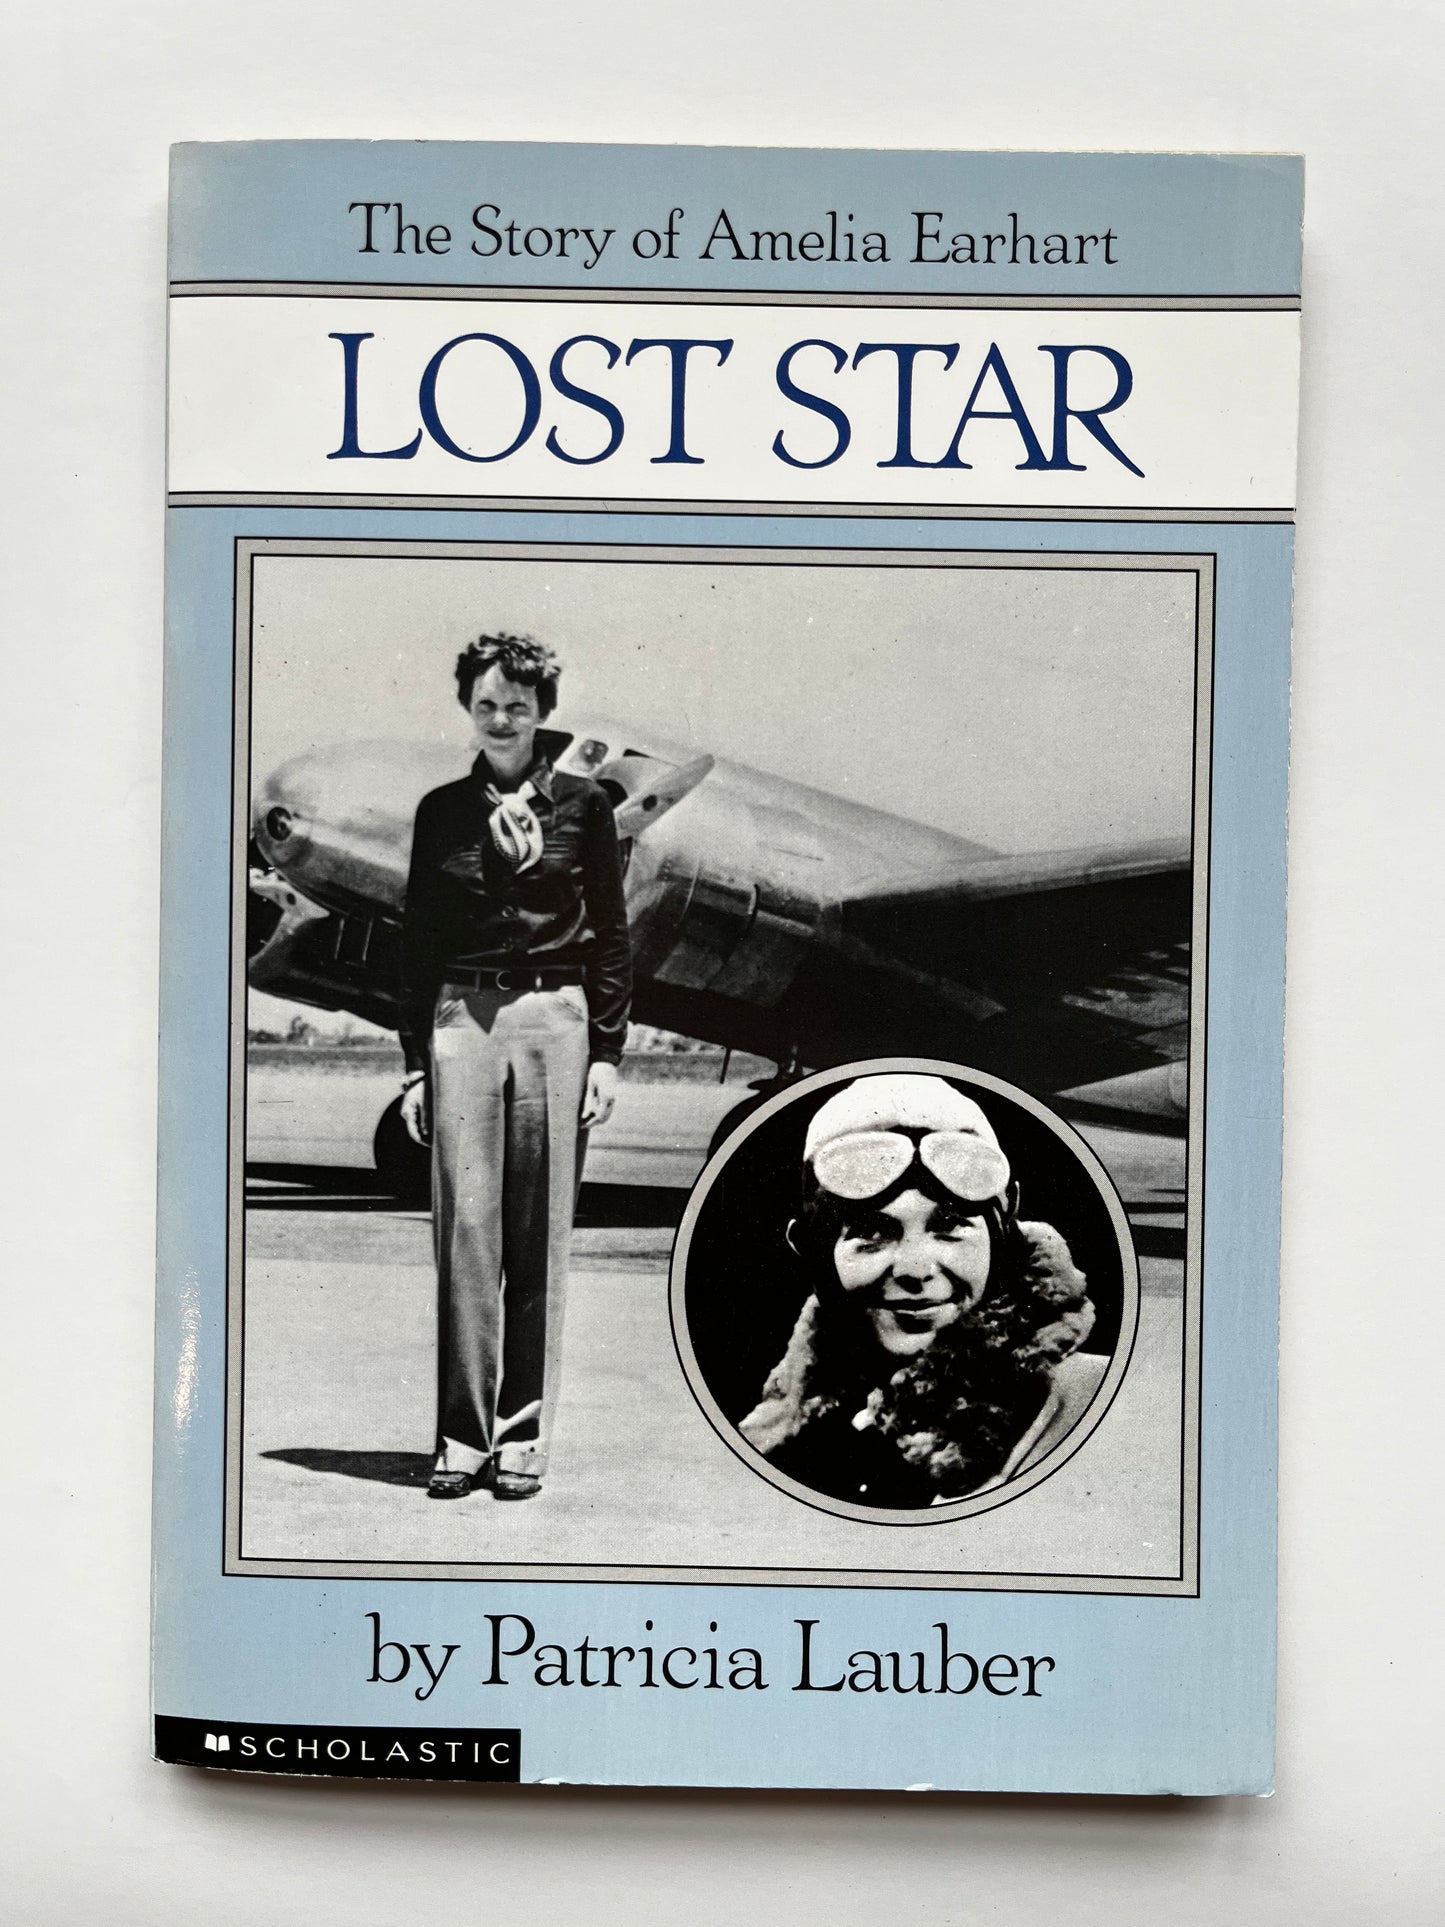 Lost star: The Story of Amelia Earhart